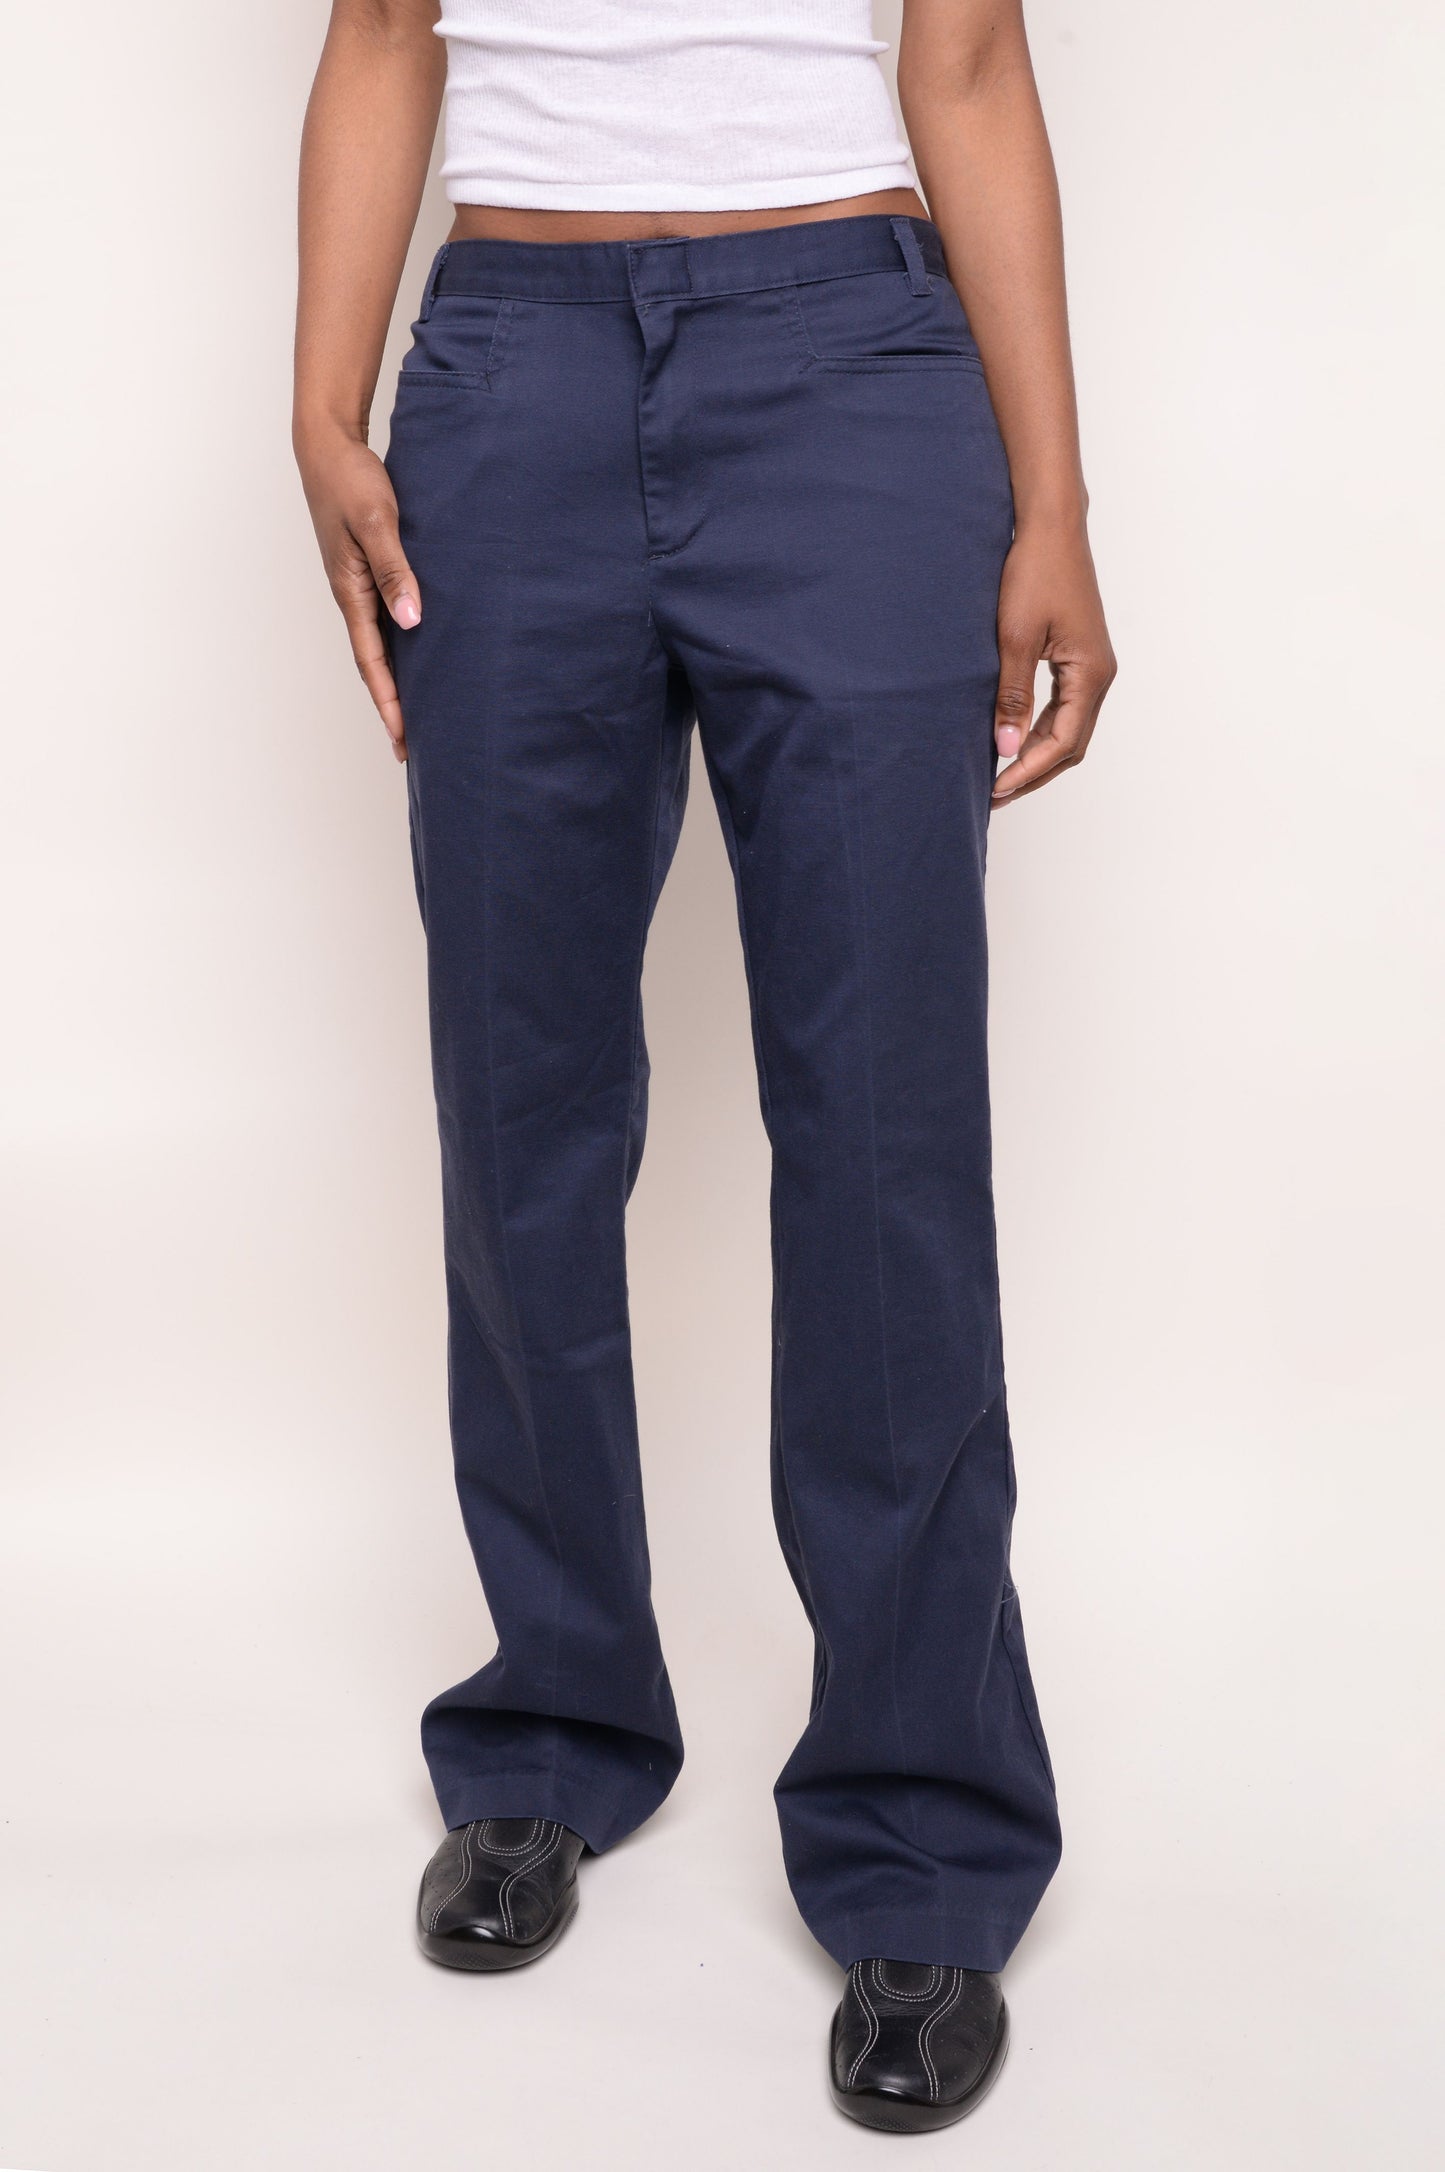 Cotton Twill Dickies Pants